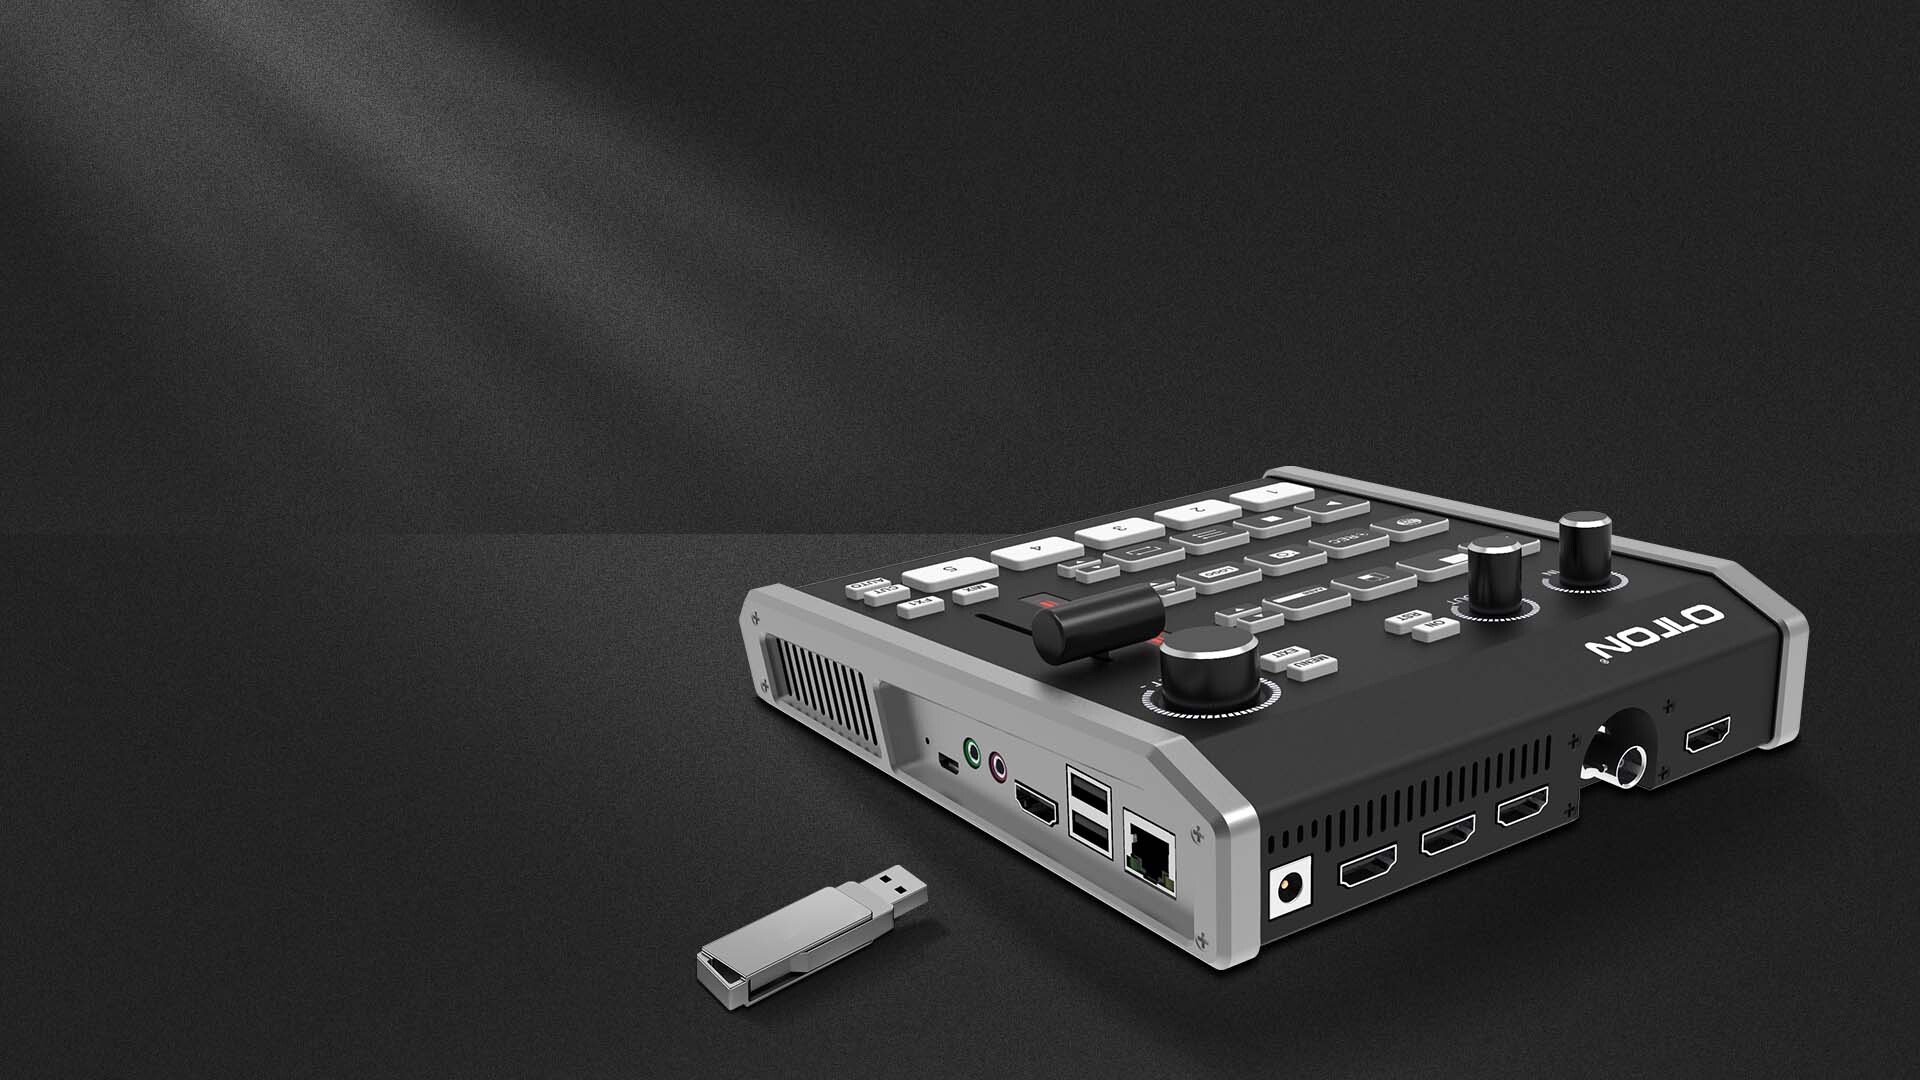 Oton Geek S04 4 Channel SDI HDMI Video Switcher with H.264 Multistream to 4 Platforms and Direct Recording